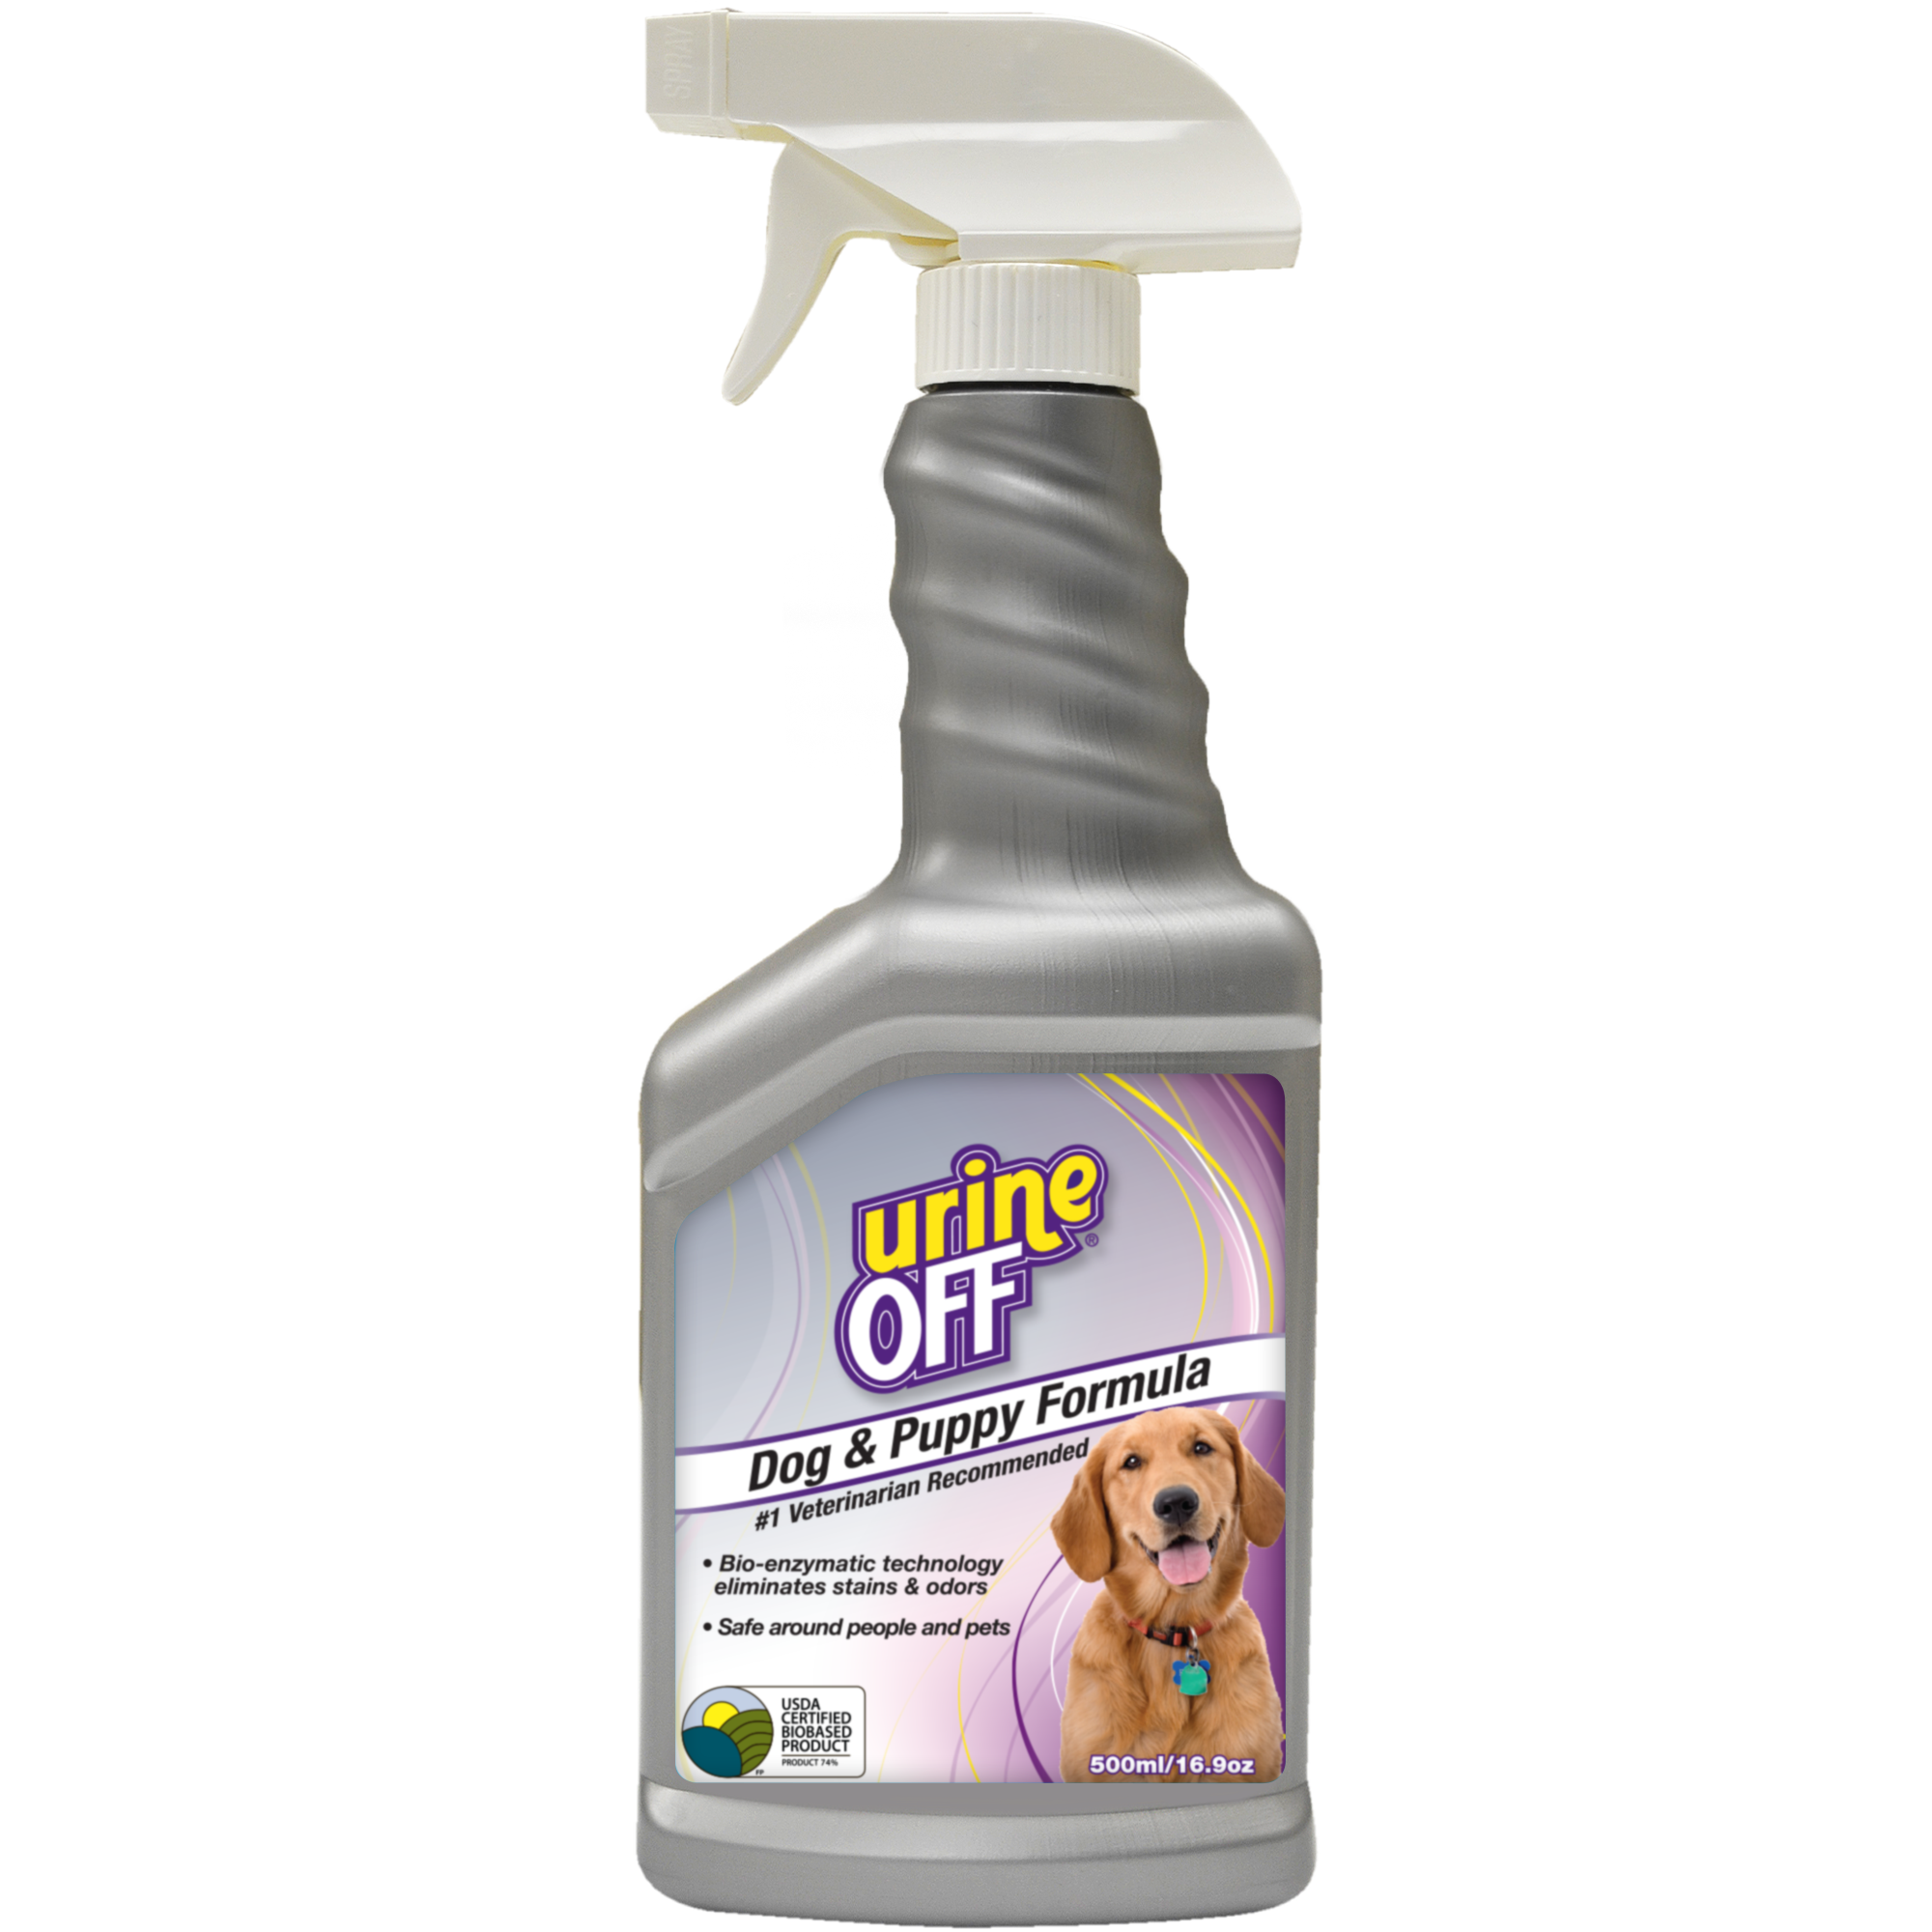 Urine Off Dogs and Puppy Hard Surface Sprayer